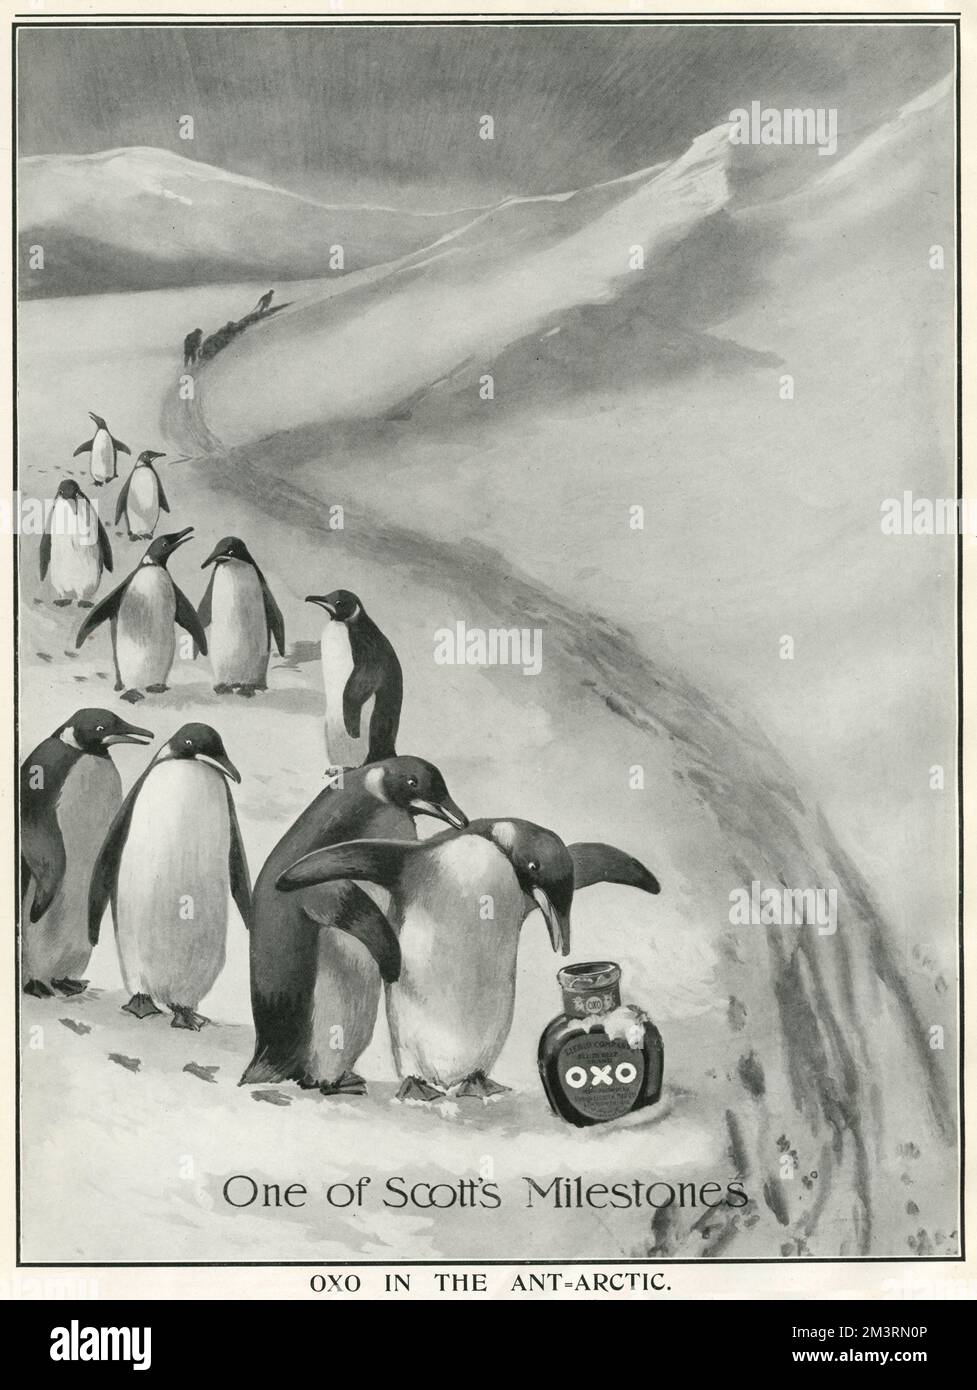 Advertisement for Oxo as supplied to Captain Scott on his ill-fated expedition to the South Pole.  The advert quotes a letter from Scott who wrote, 'The various preparations of Oxo have been found very useful and suitable for our camp purposes.'  Picture shows penguins looking curiously at an empty jar of Oxo as Scott's party ploughs onwards to their destination.  Ironically, this advertisement was published in The Tatler on 27th March, just two days before Scott and remaining two members of his team died from exposure and starvation.       Date: 1912 Stock Photo